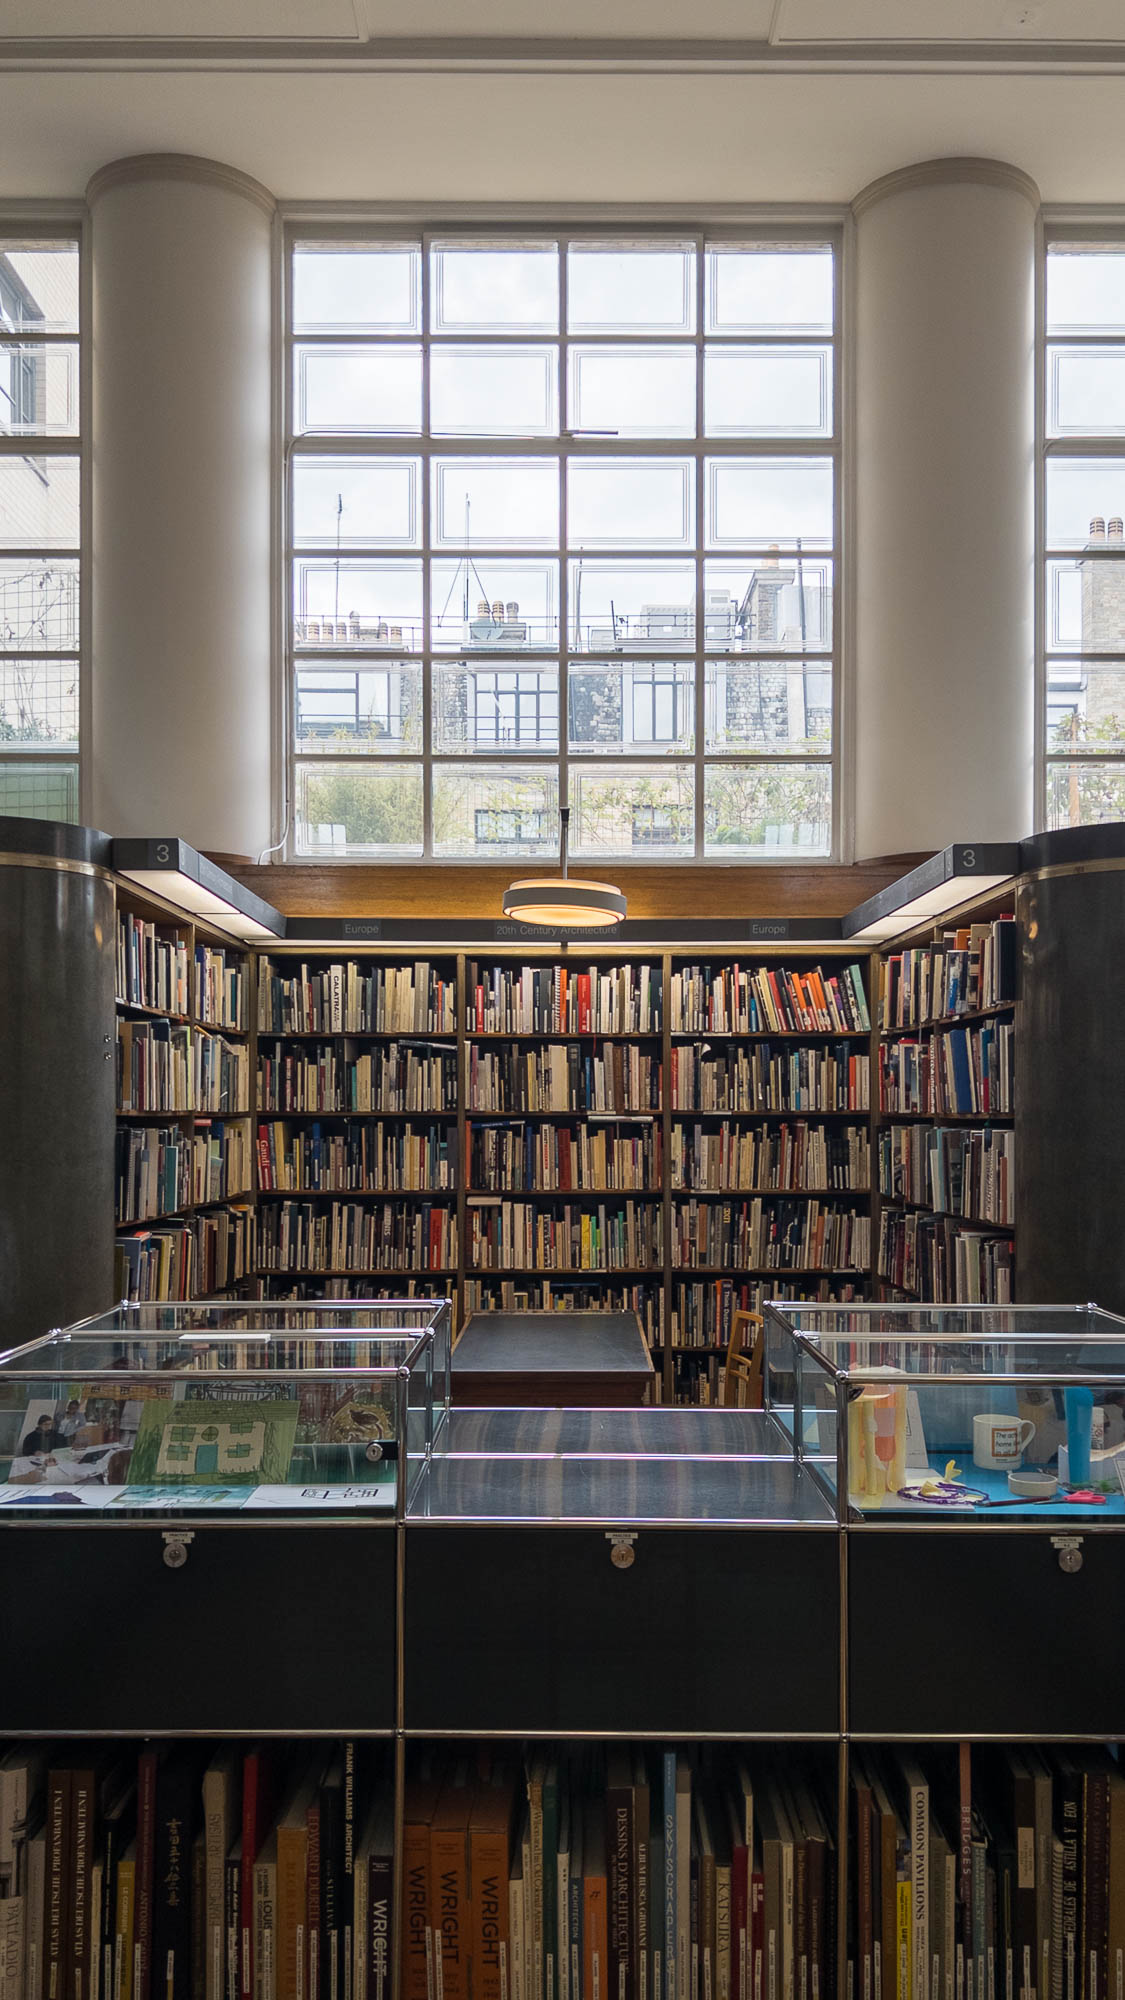 Interior of a library showing a book nook filled with bookshelves, with a row of windows above. In front are display cases with books underneath.